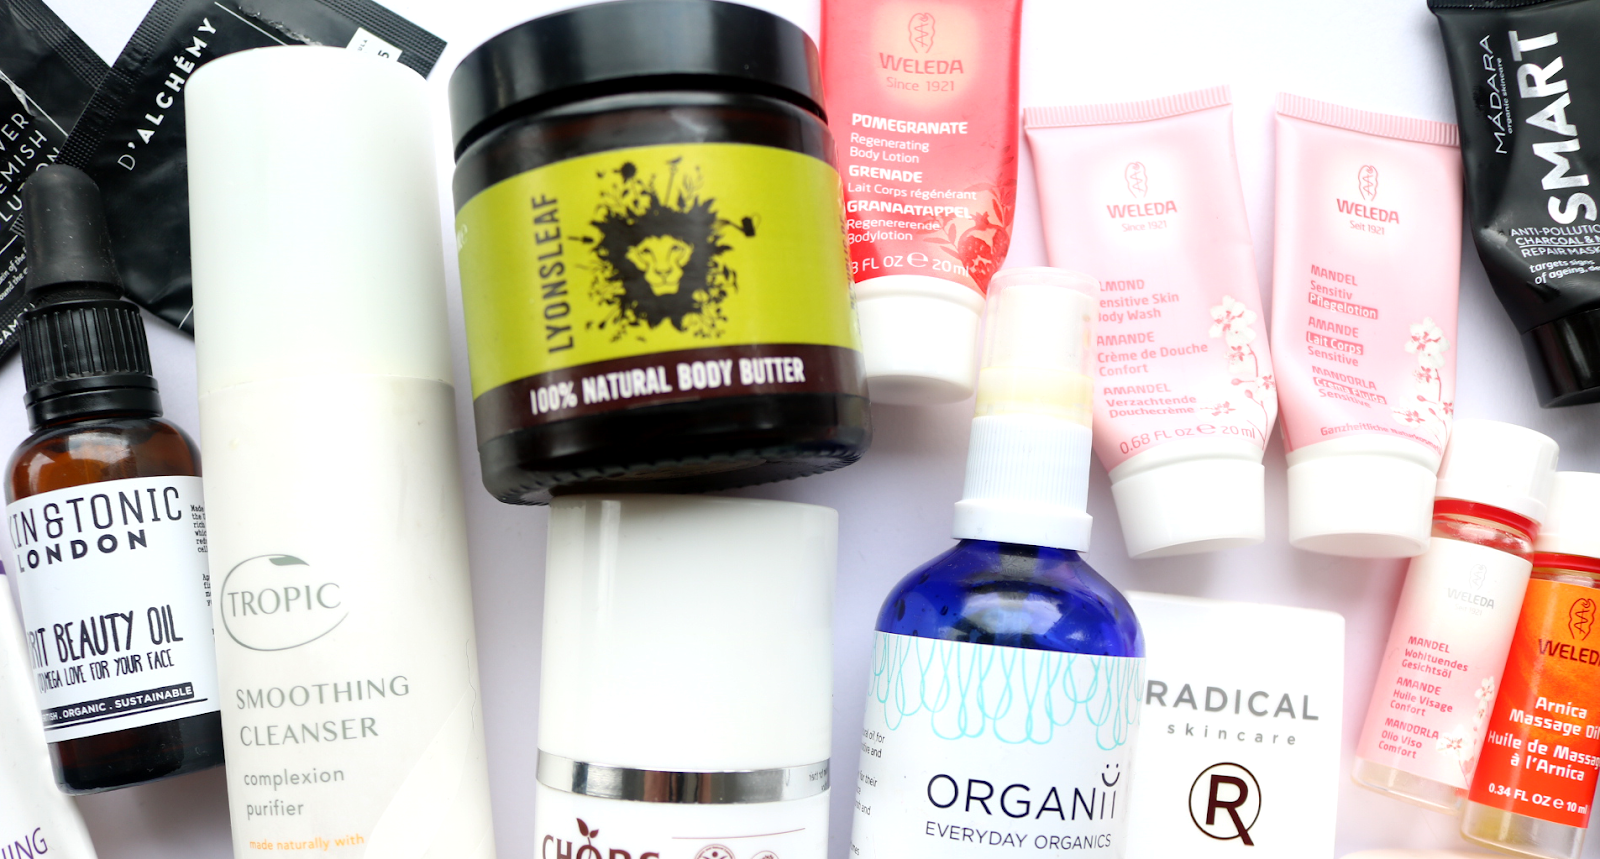 January Empties: Products I've Used Up